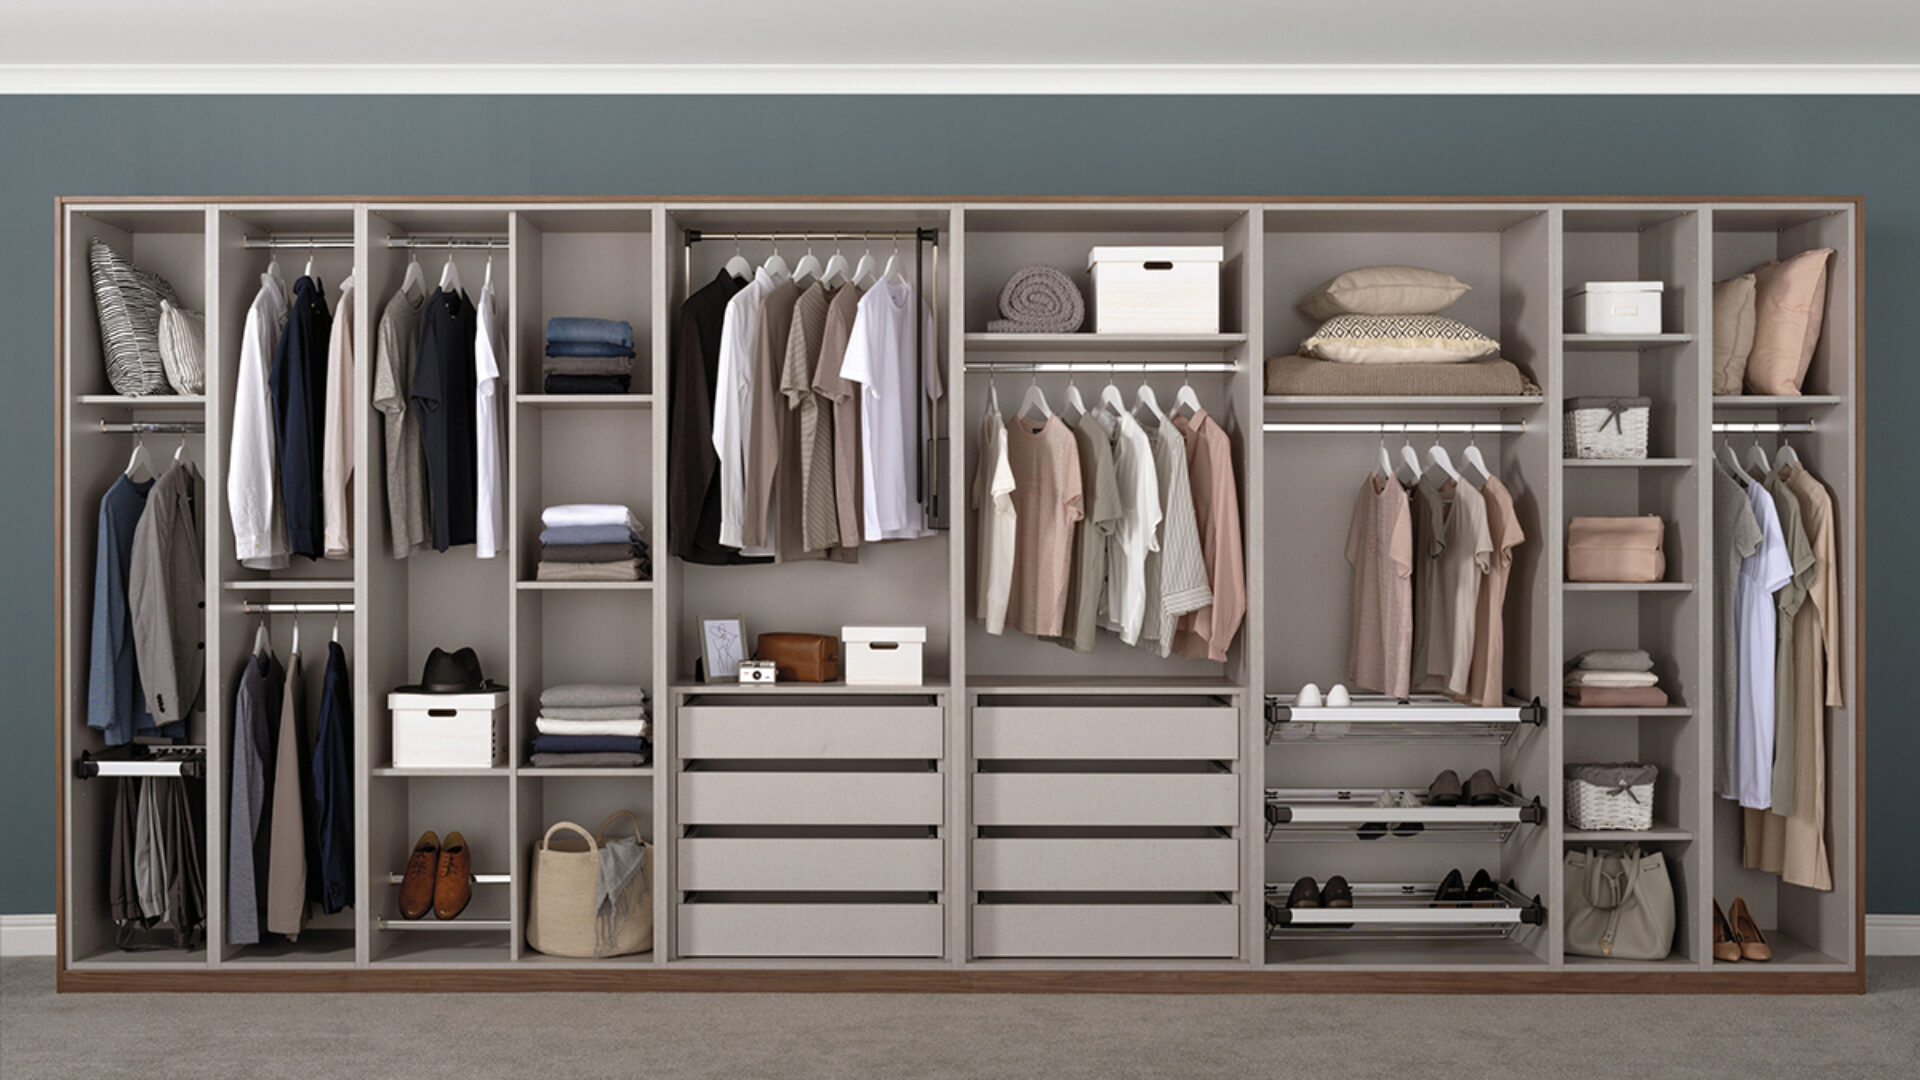 Wardrobe Internal arrangement with drawers and shelves